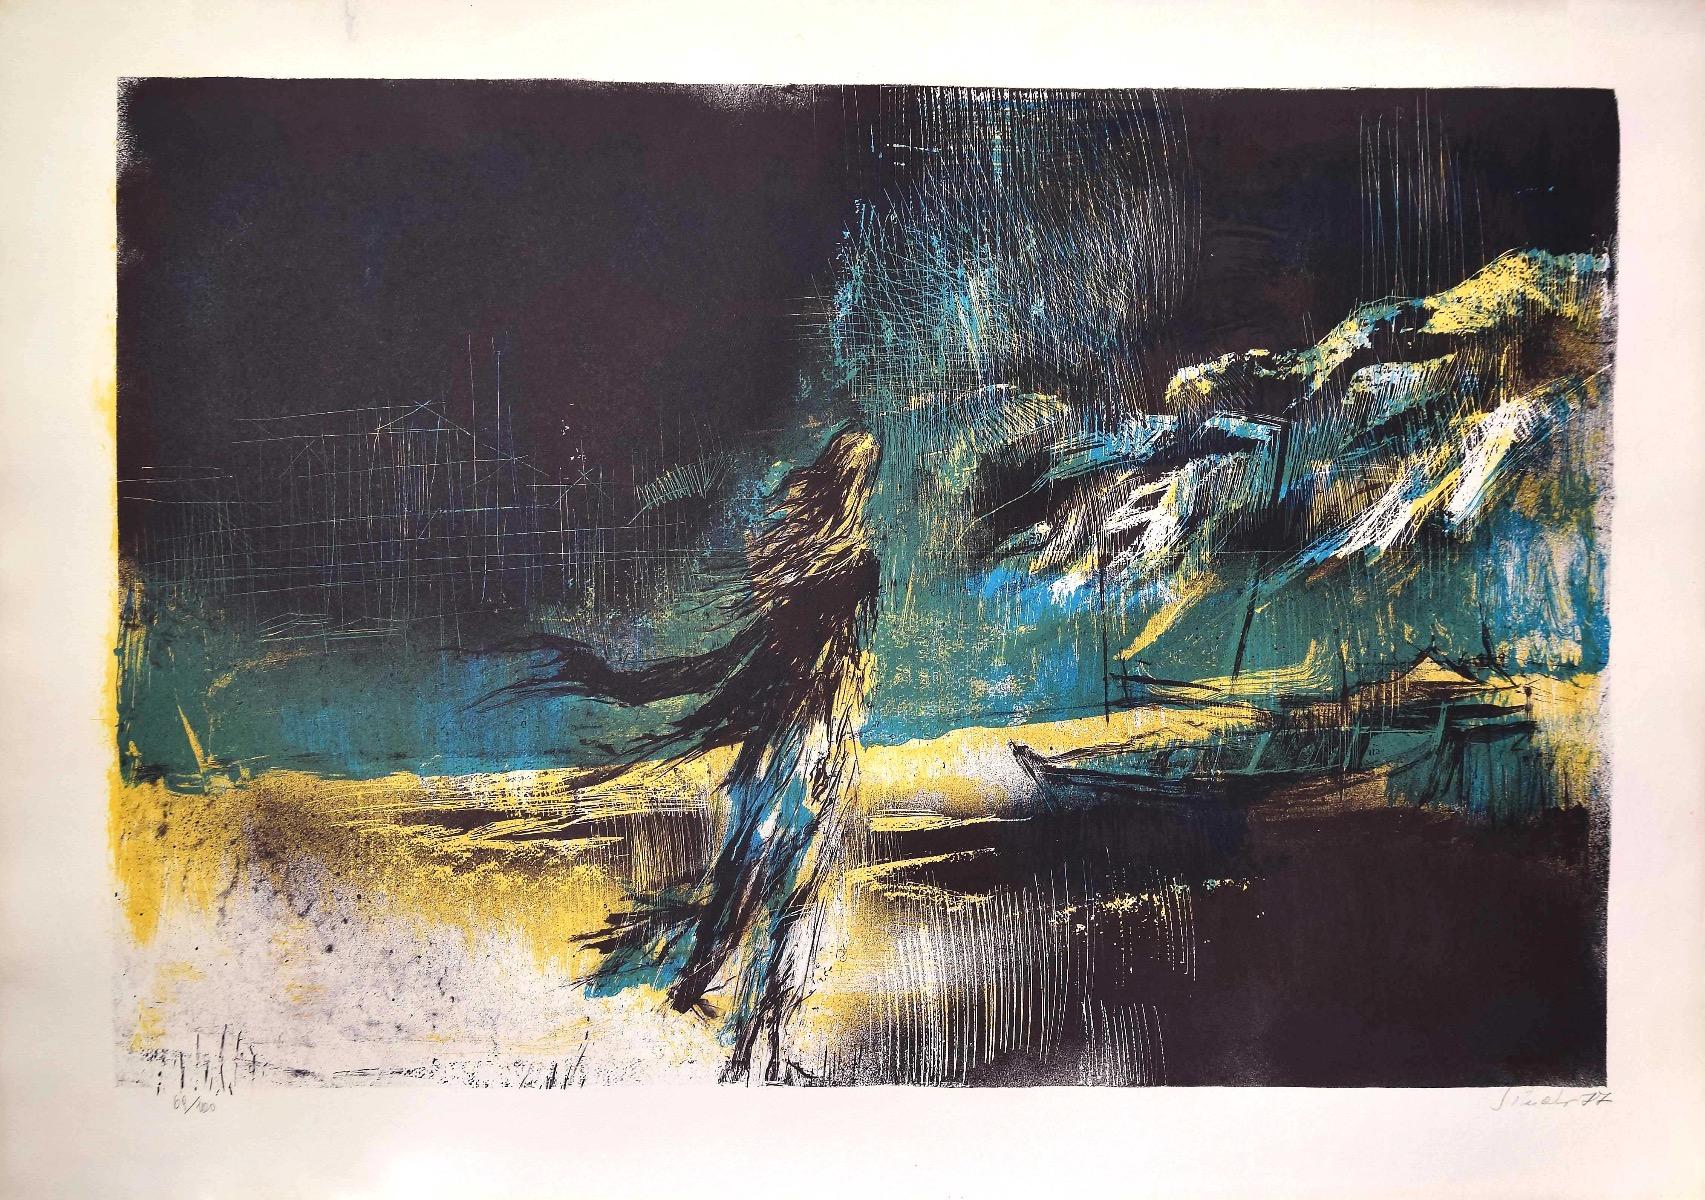 On the beach is an original lithograph realized by Nicola Simbari in 1977.

Hand-signed on the lower right.

Numbered . Edition 69/100.

The artwork represents a beach with an abstract multicolour composition. 

Nicola Simbari (San Lucido, 1927) was